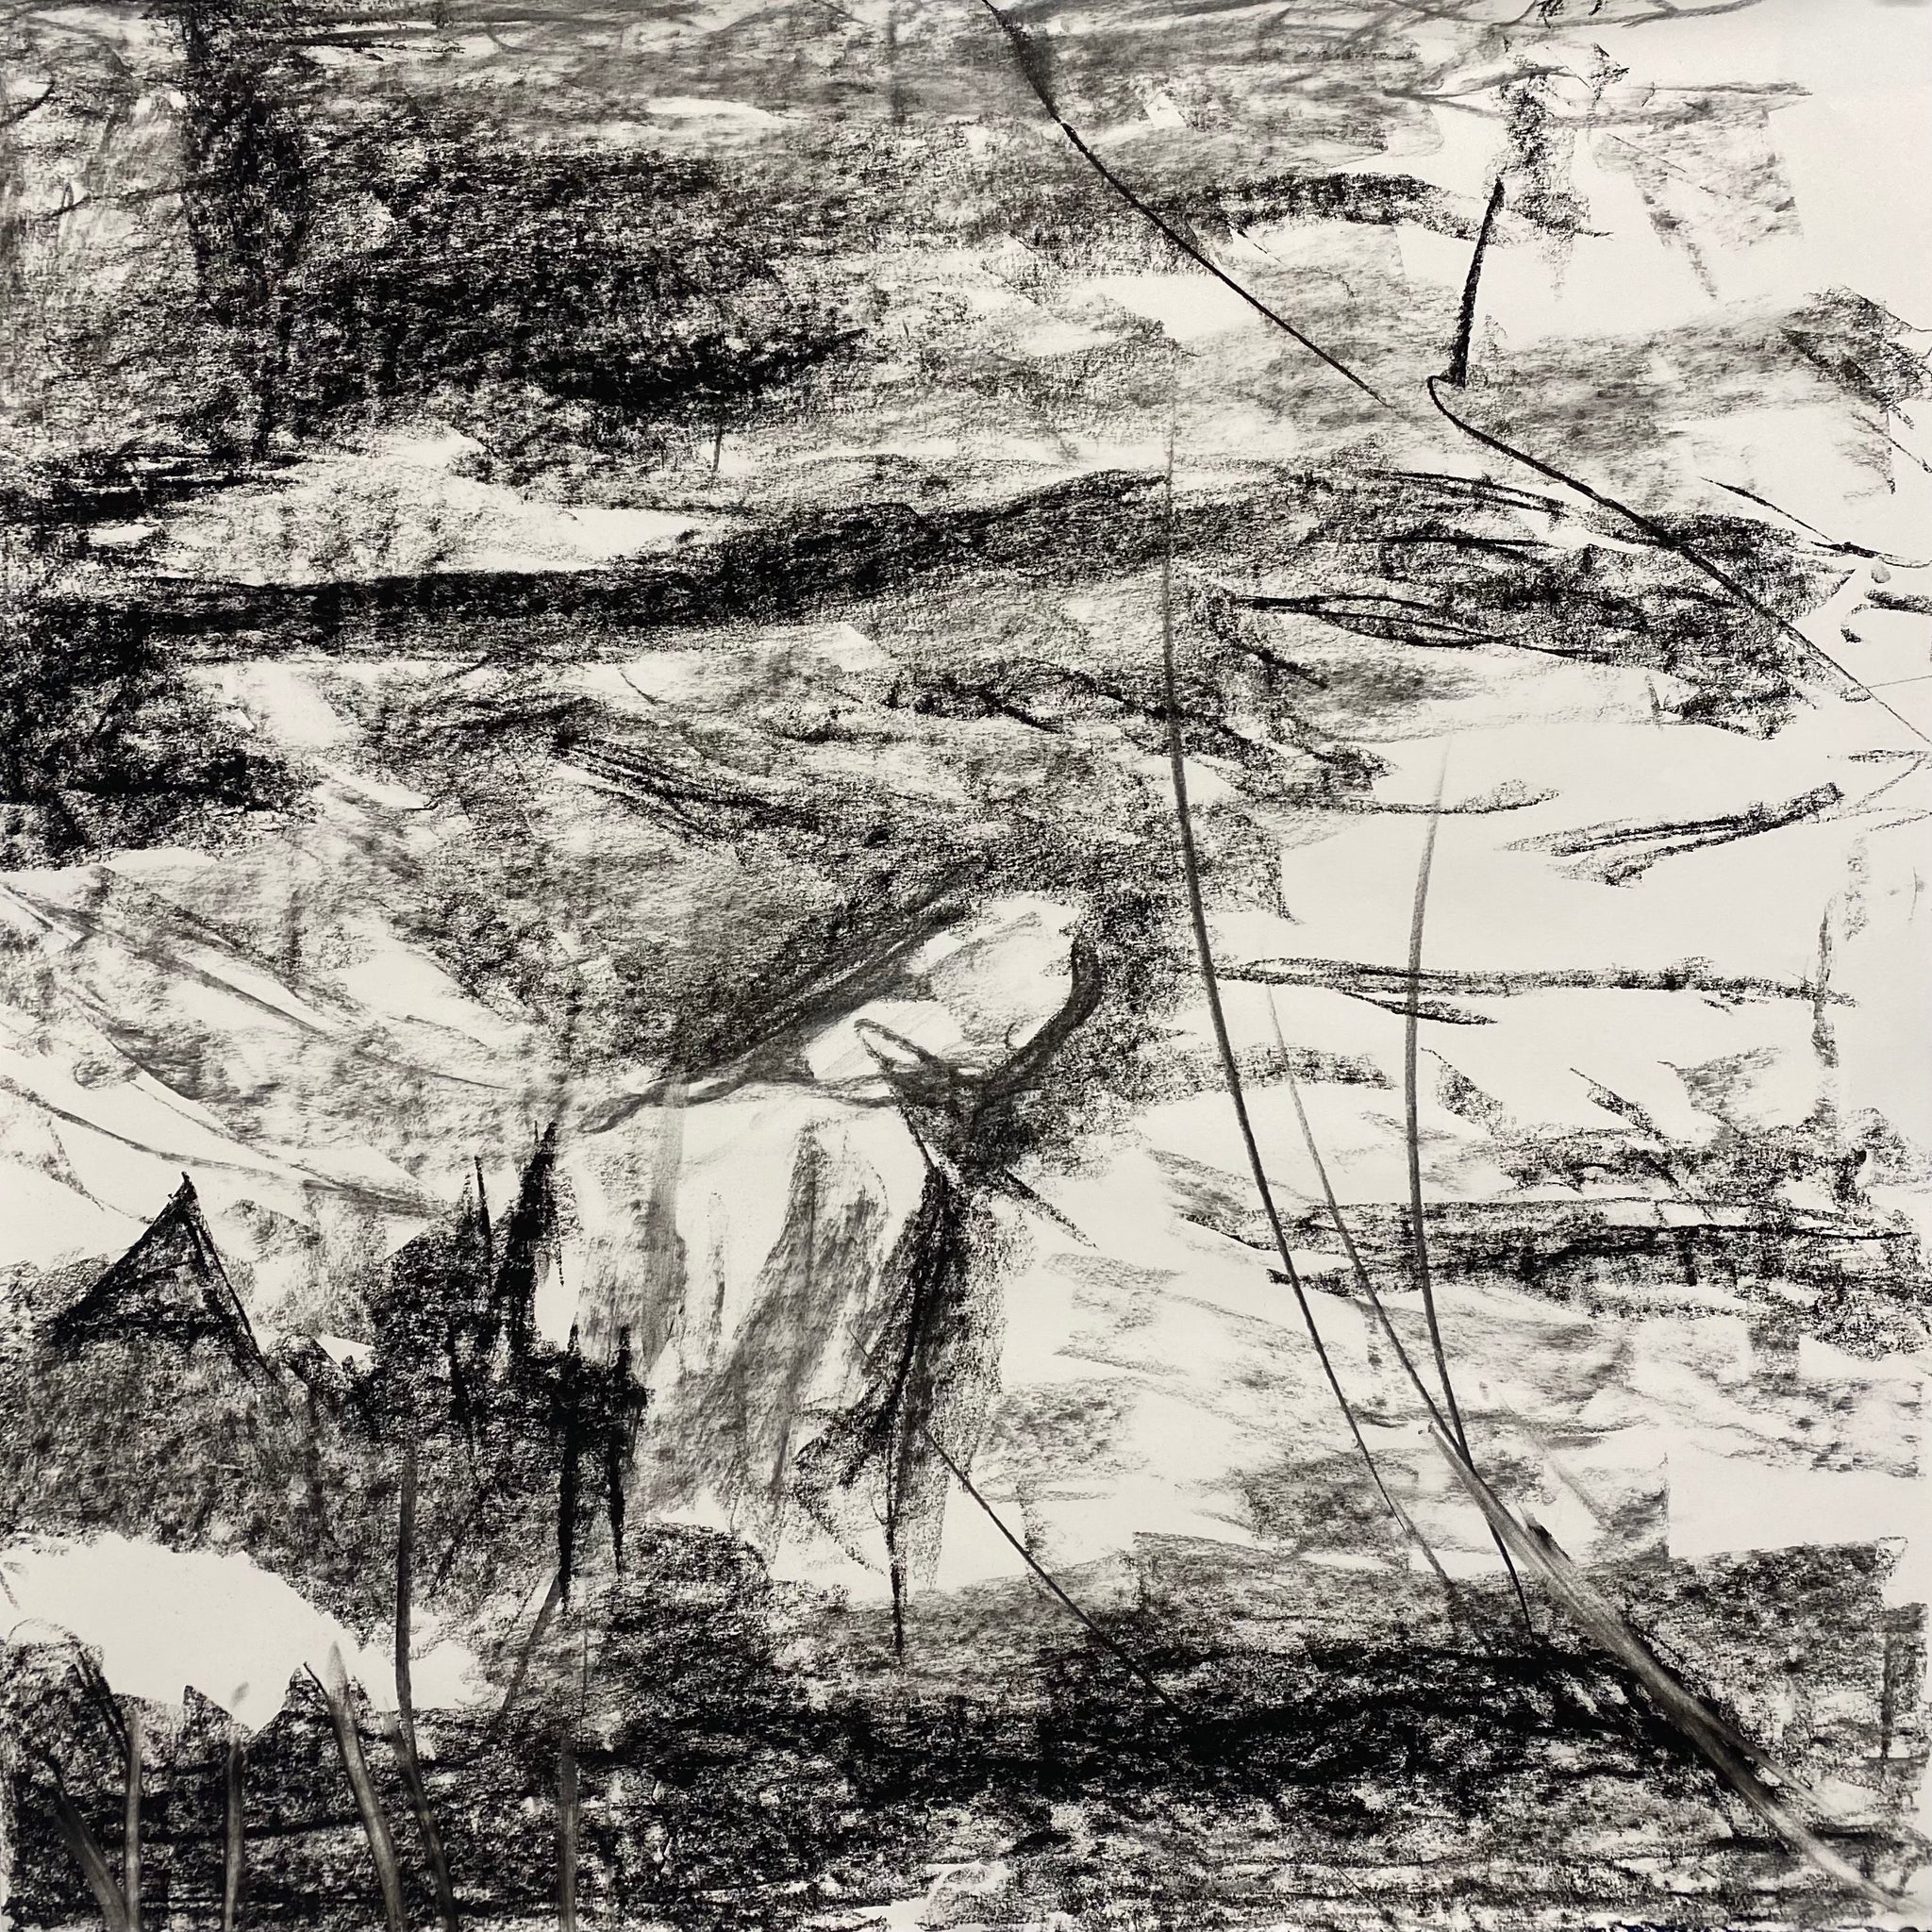 Juanita Bellavance, Sands of time concept drawing, From the Chestatee River portfolio, 2021, Charcoal on paper, 24 x 24 inches.